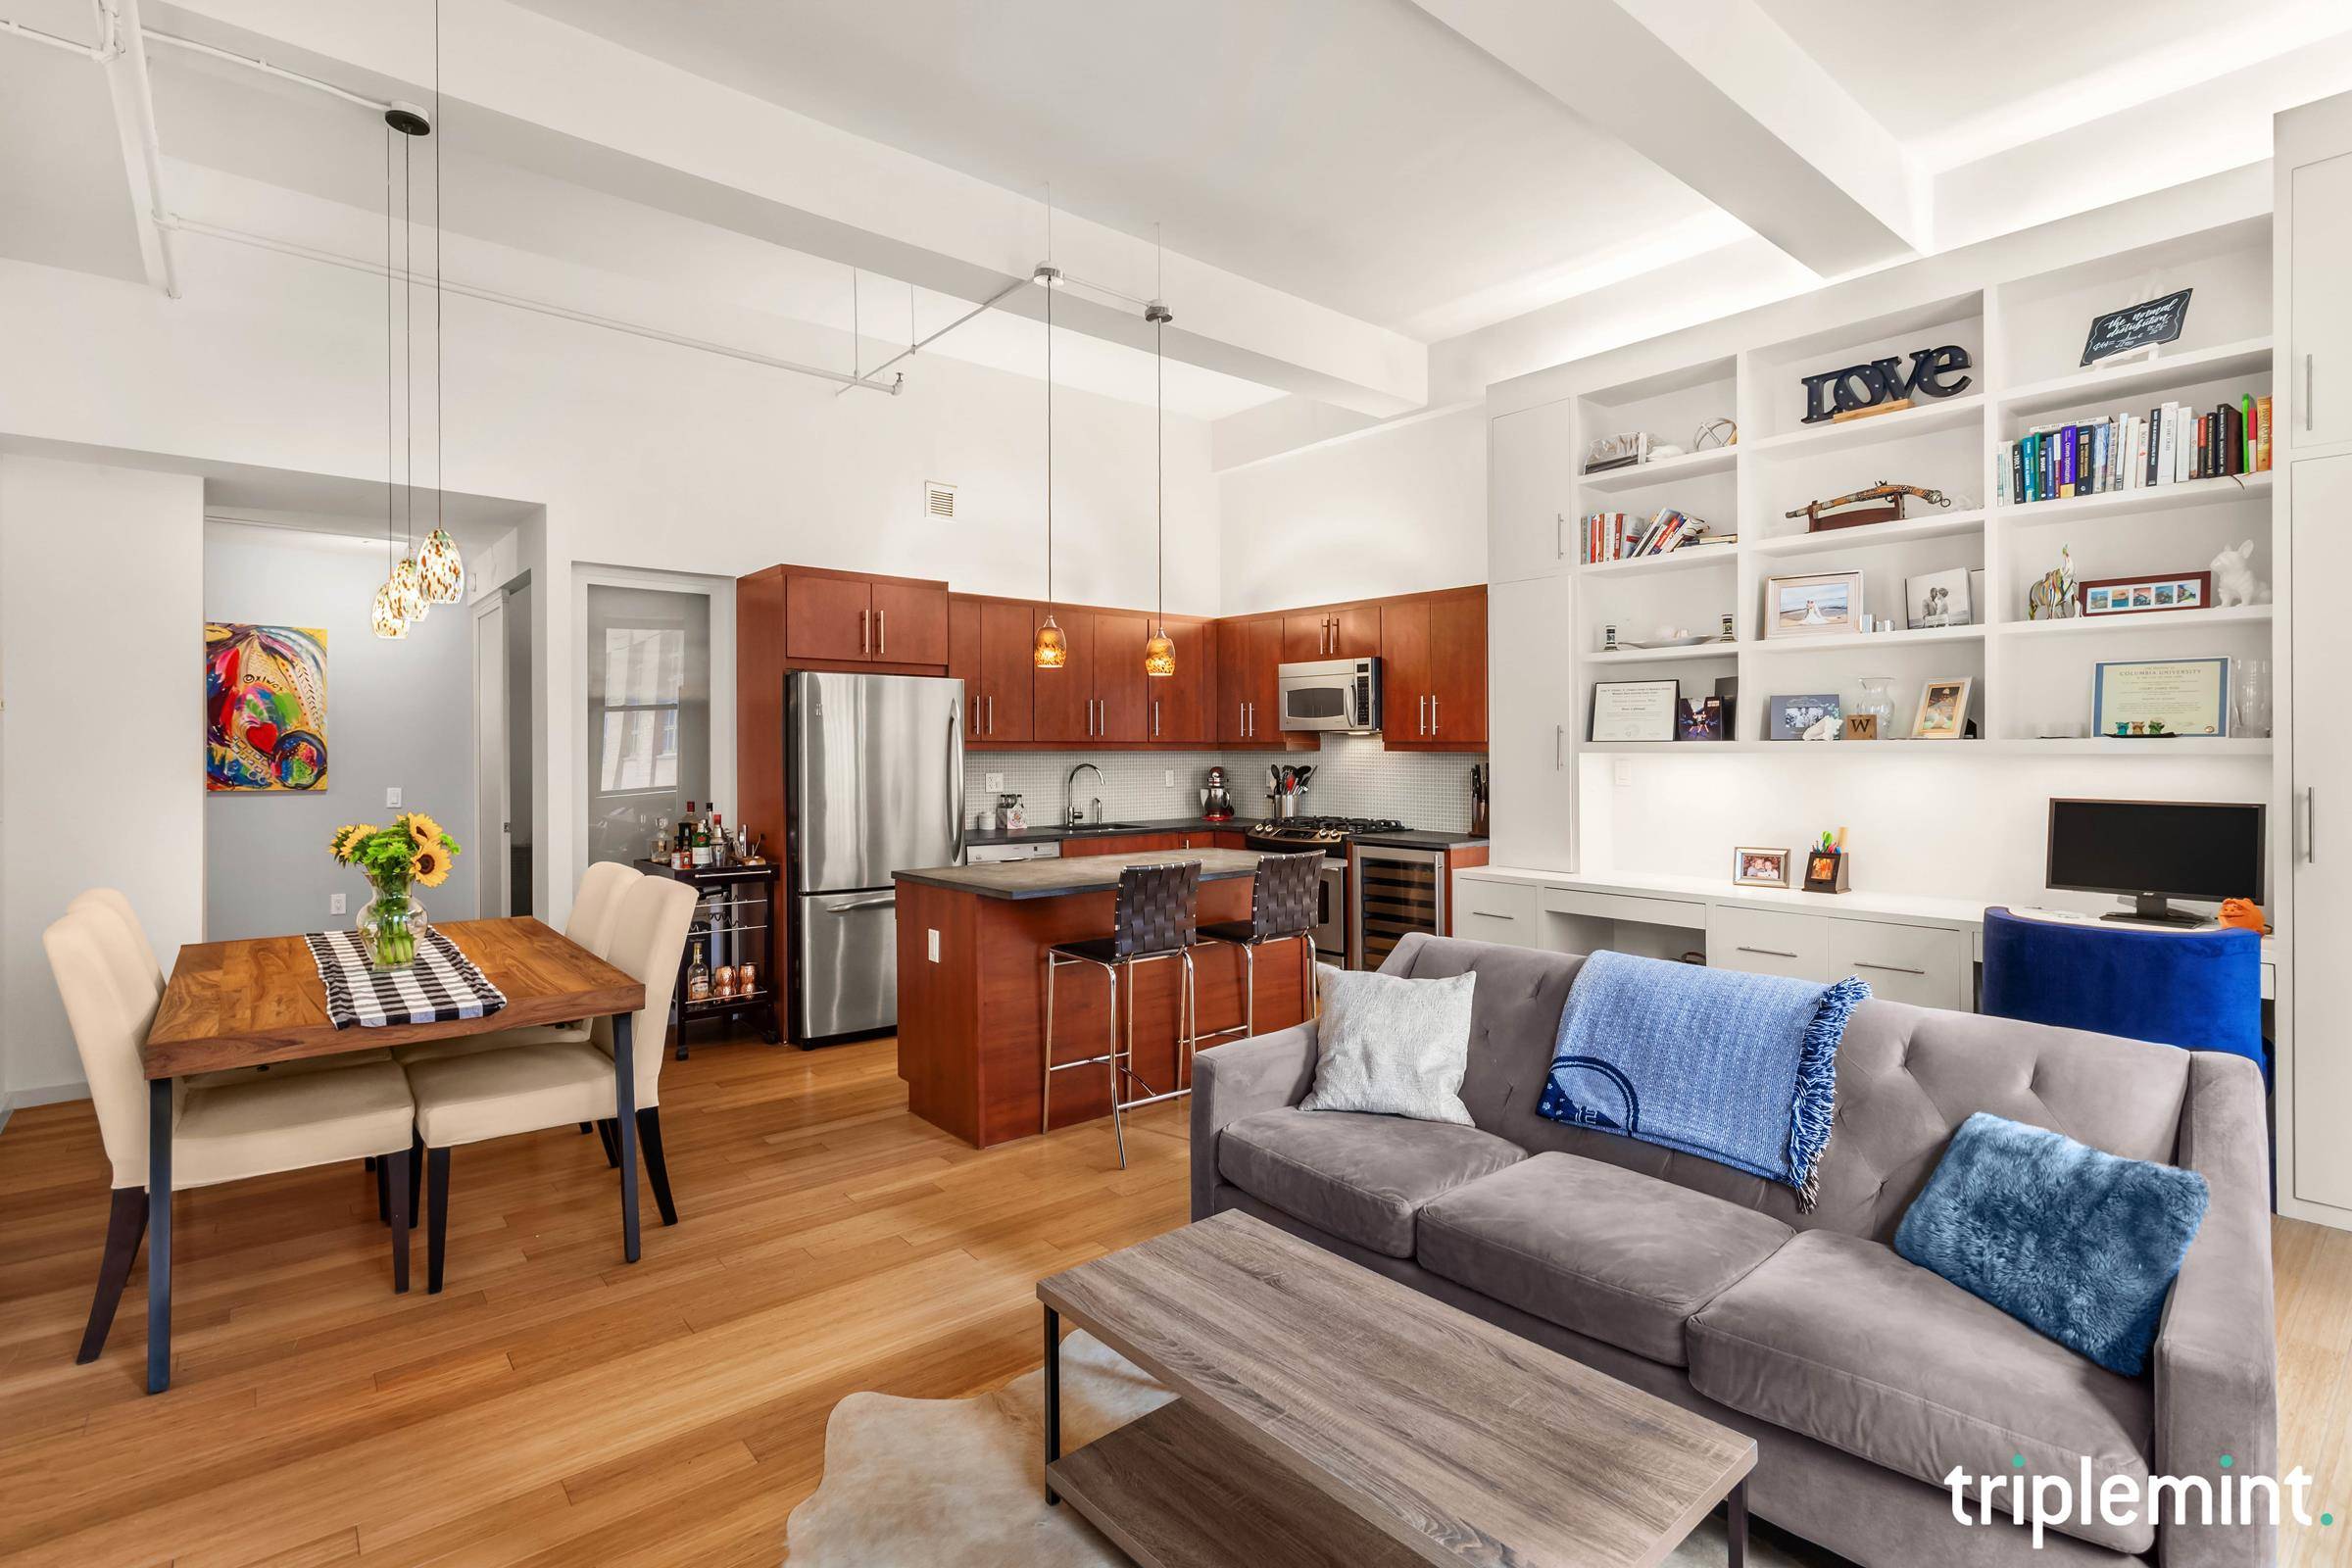 Welcome to your very own 1, 055 square foot 1 bedroom loft located in the convenient and bustling neighborhood of Downtown Brooklyn.